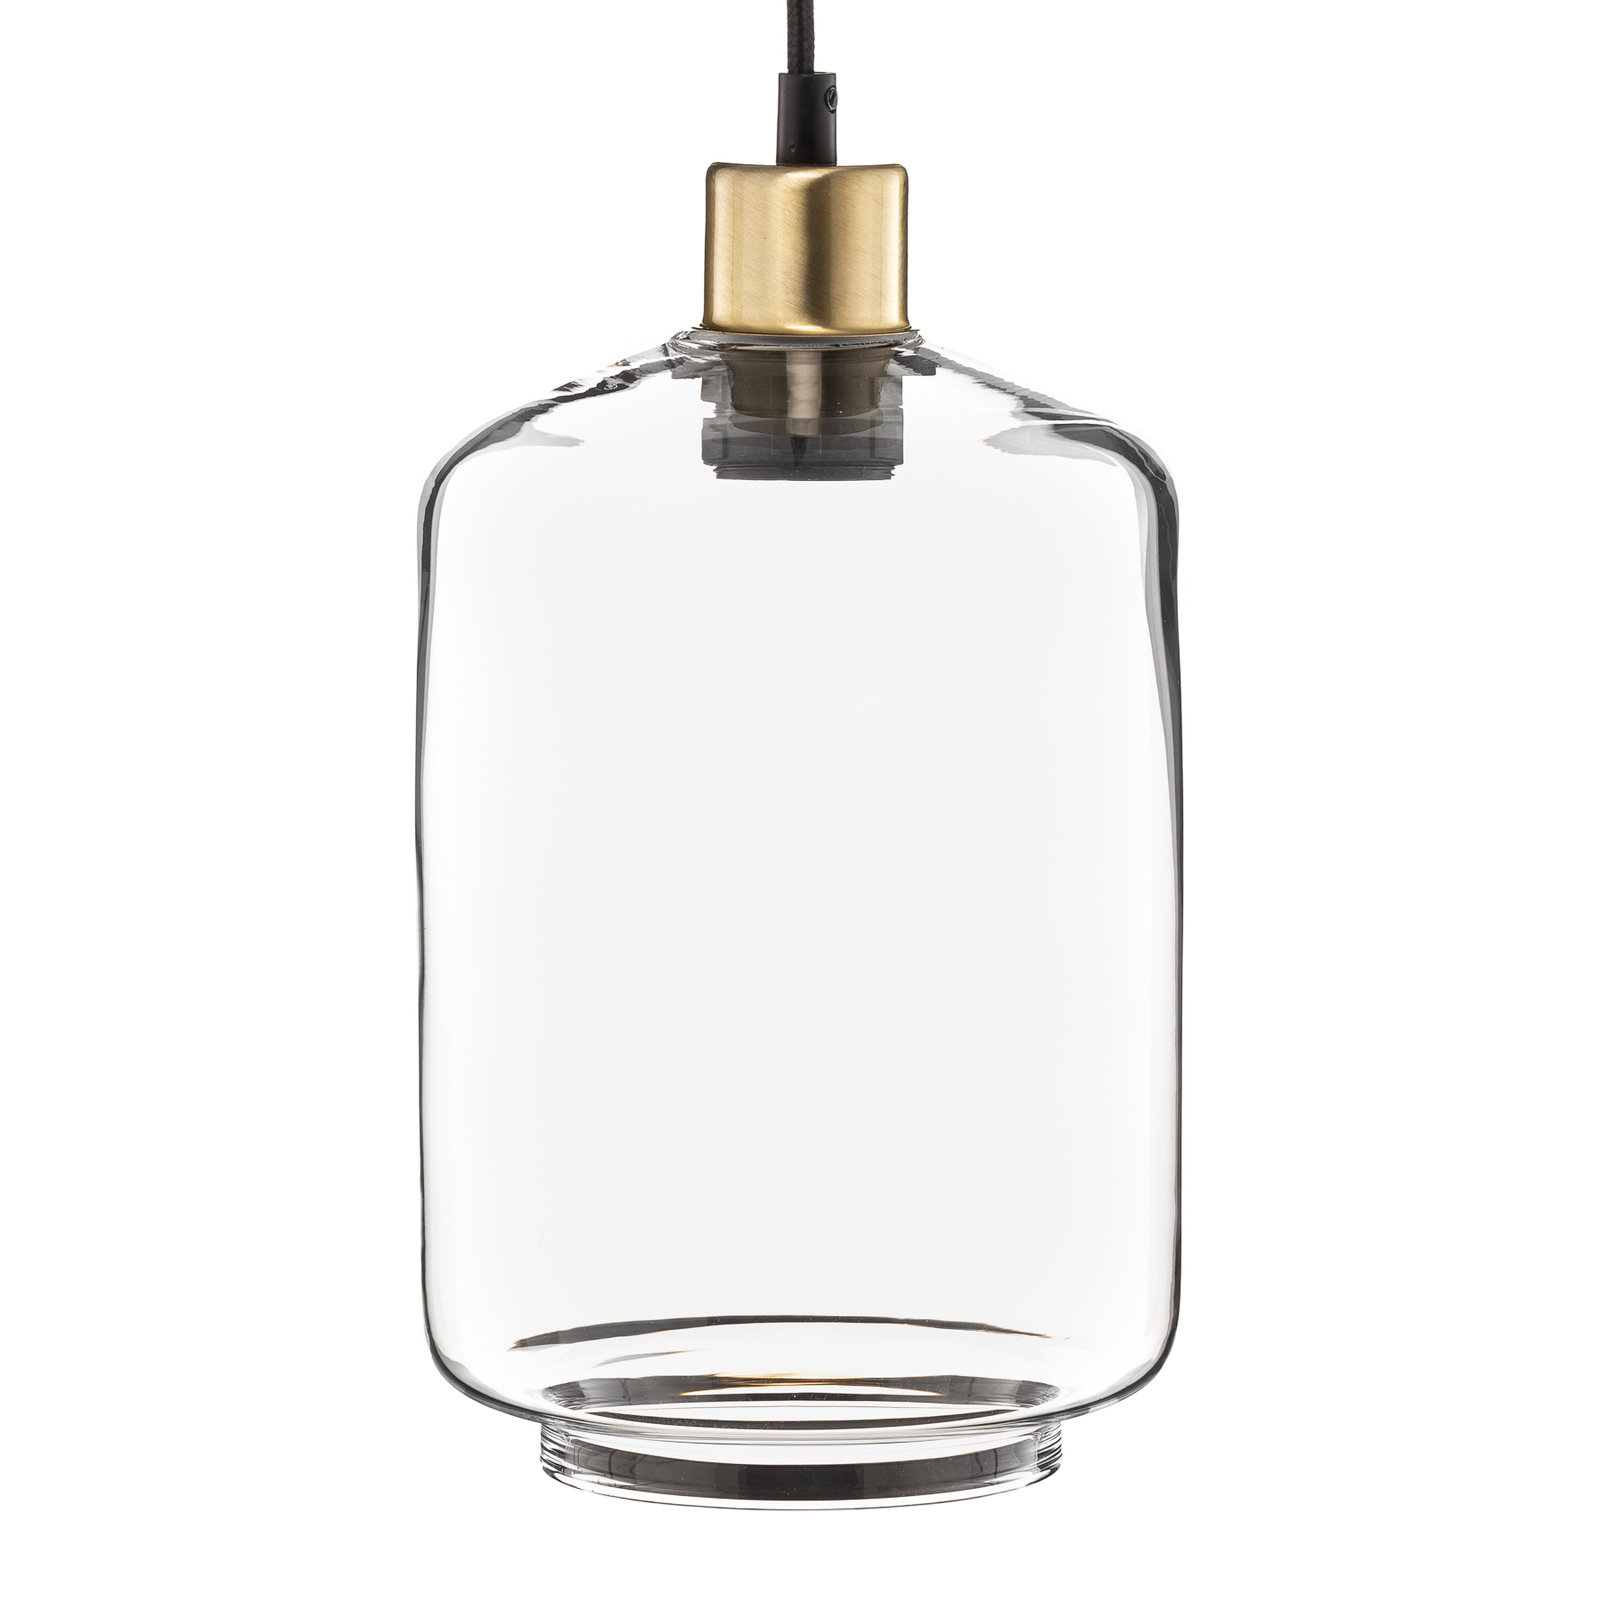 Pendant light Tube with clear glass shade Ø 17cm